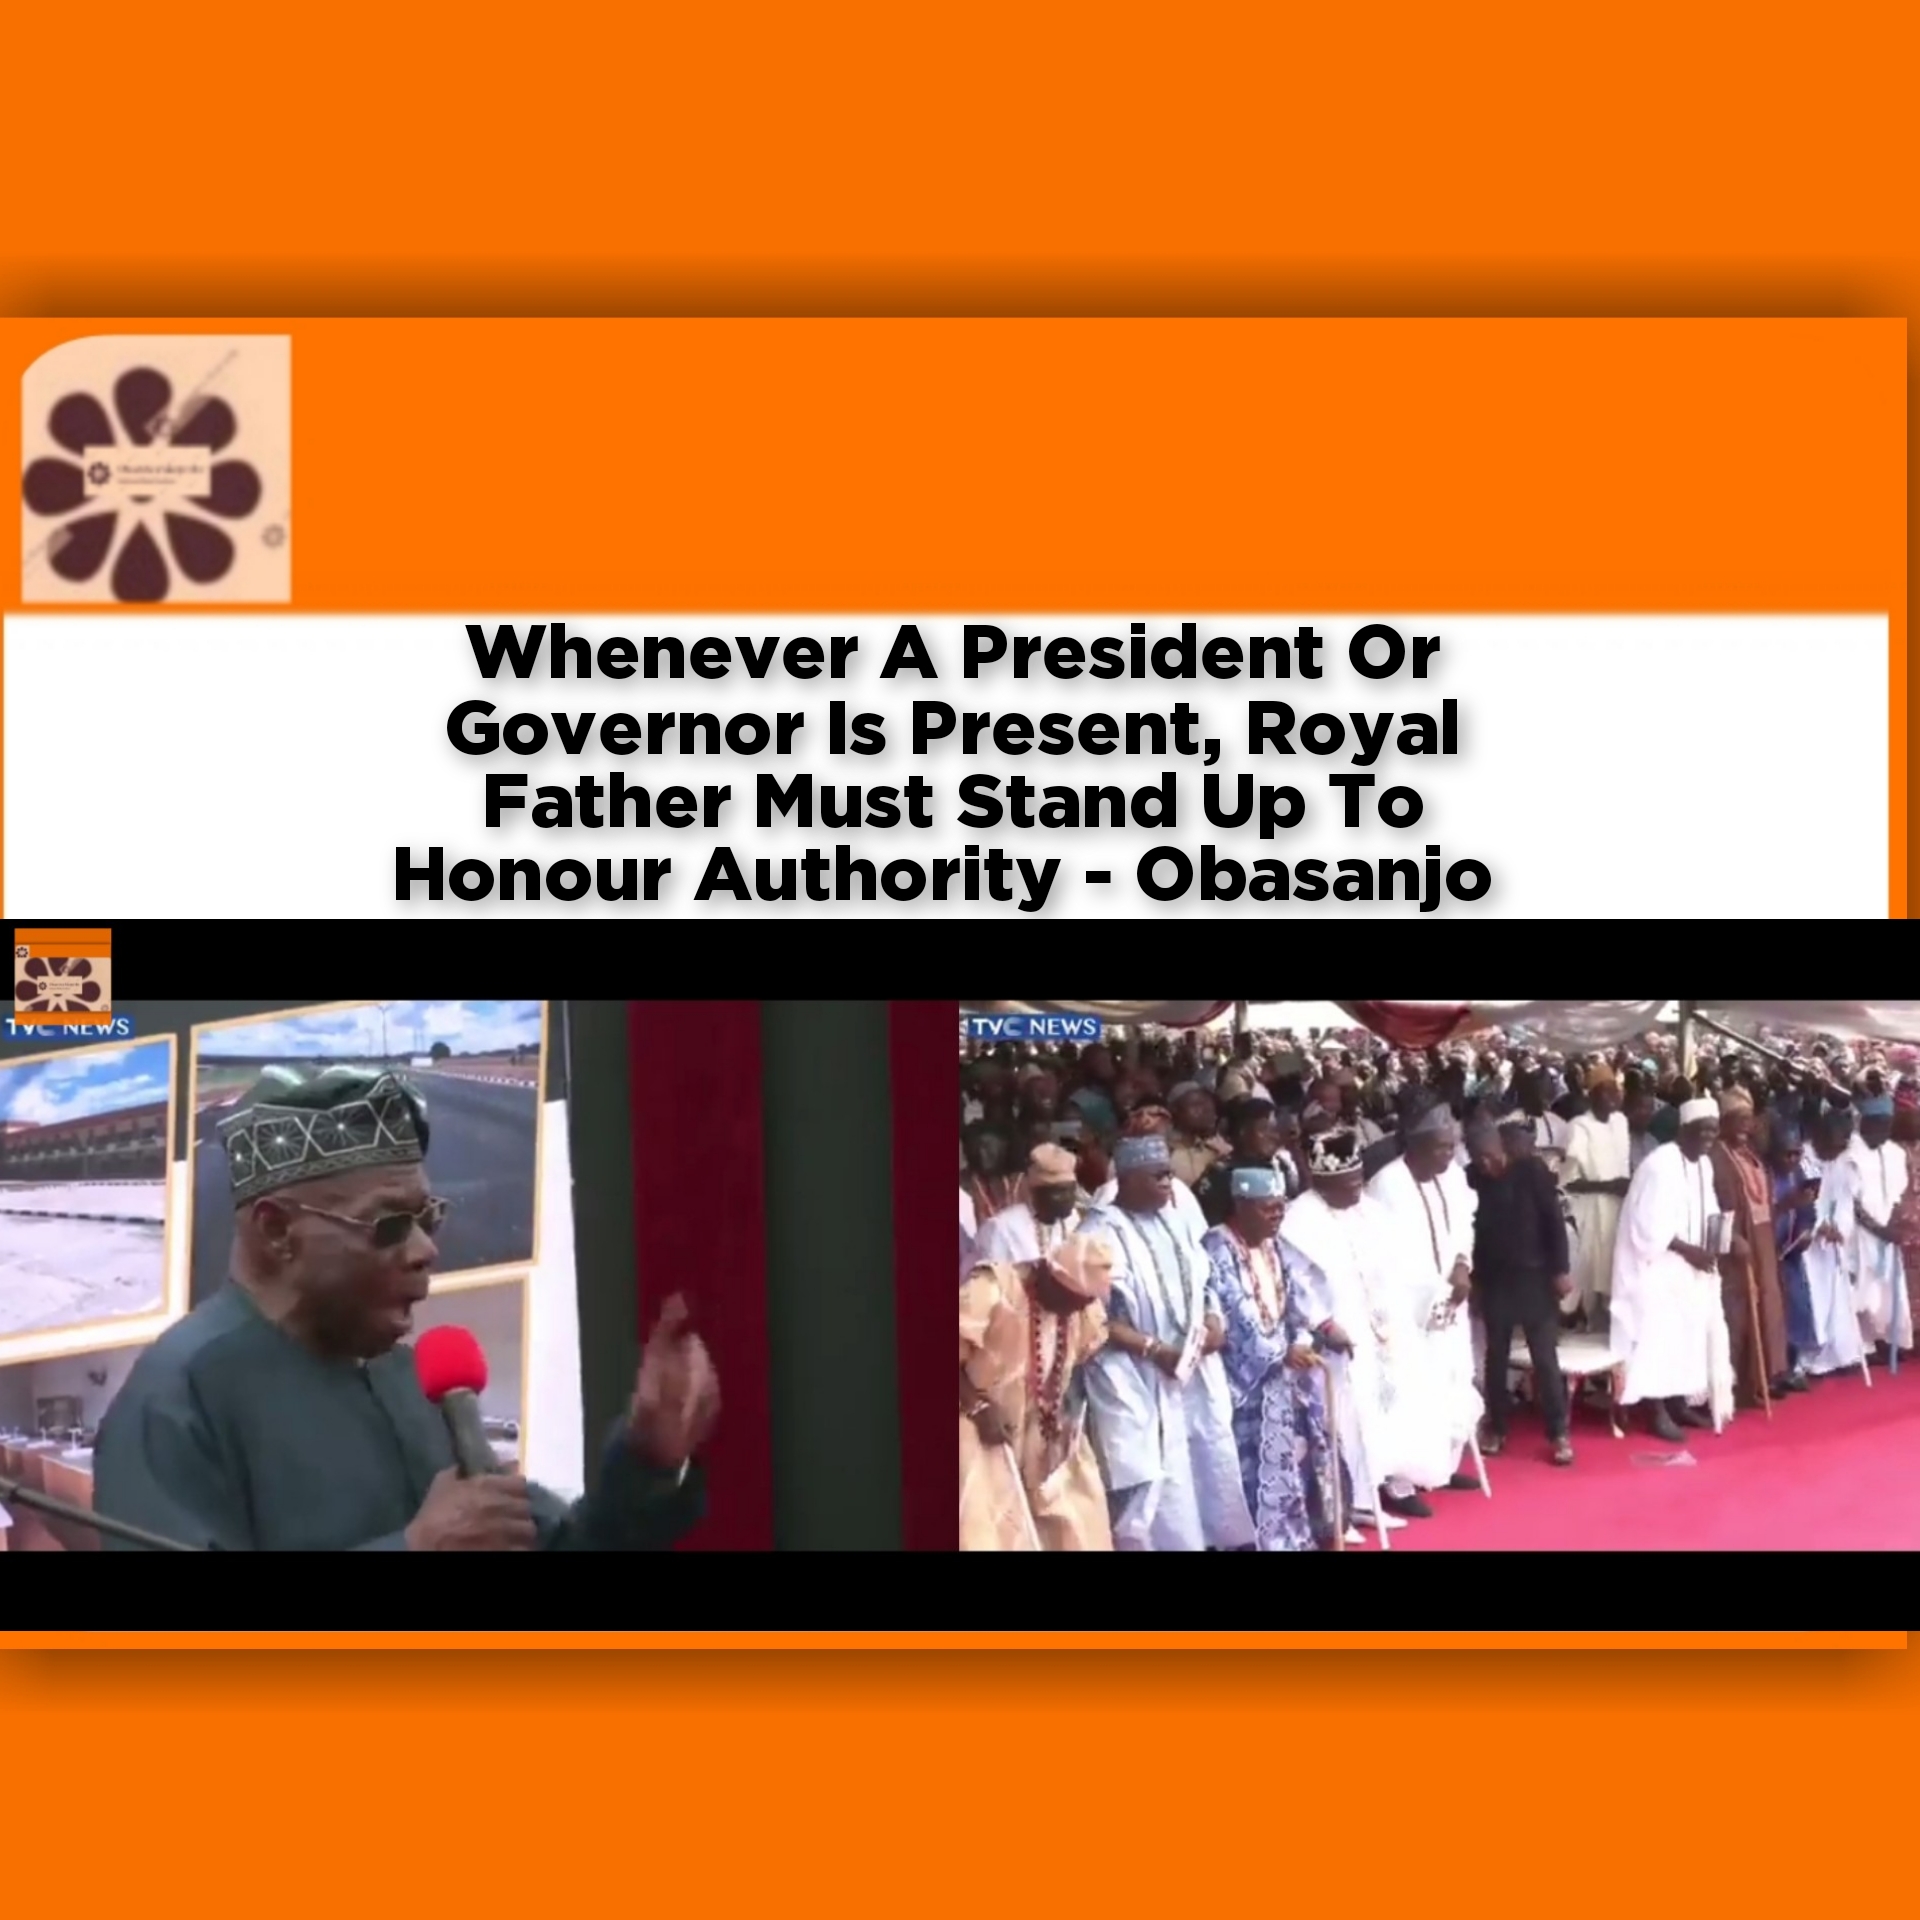 Whenever A President Or Governor Is Present, Royal Father Must Stand Up To Honour Authority - Obasanjo ~ OsazuwaAkonedo #Abiodun #FaniKayode #Femi #Governor #Makinde #Monarchs #Obasanjo #Obi #Olusegun #Oyo #Peter #President